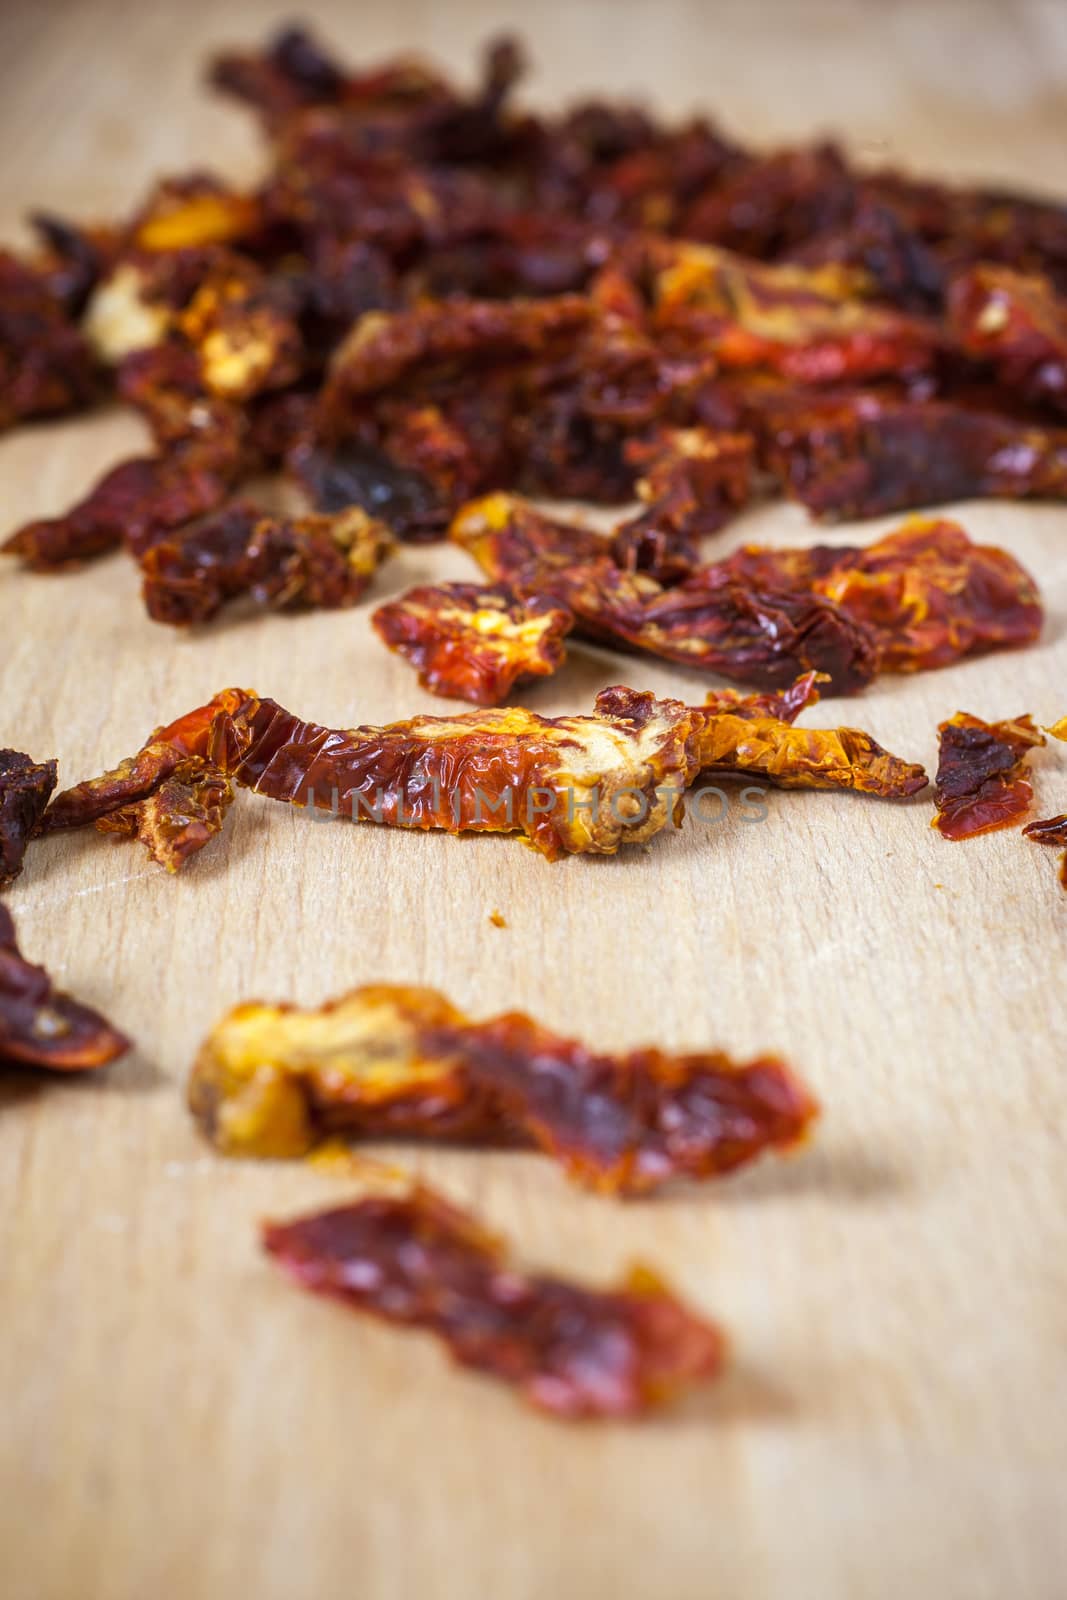 Sun dried tomatoes sliced up on a wooden cutting board.